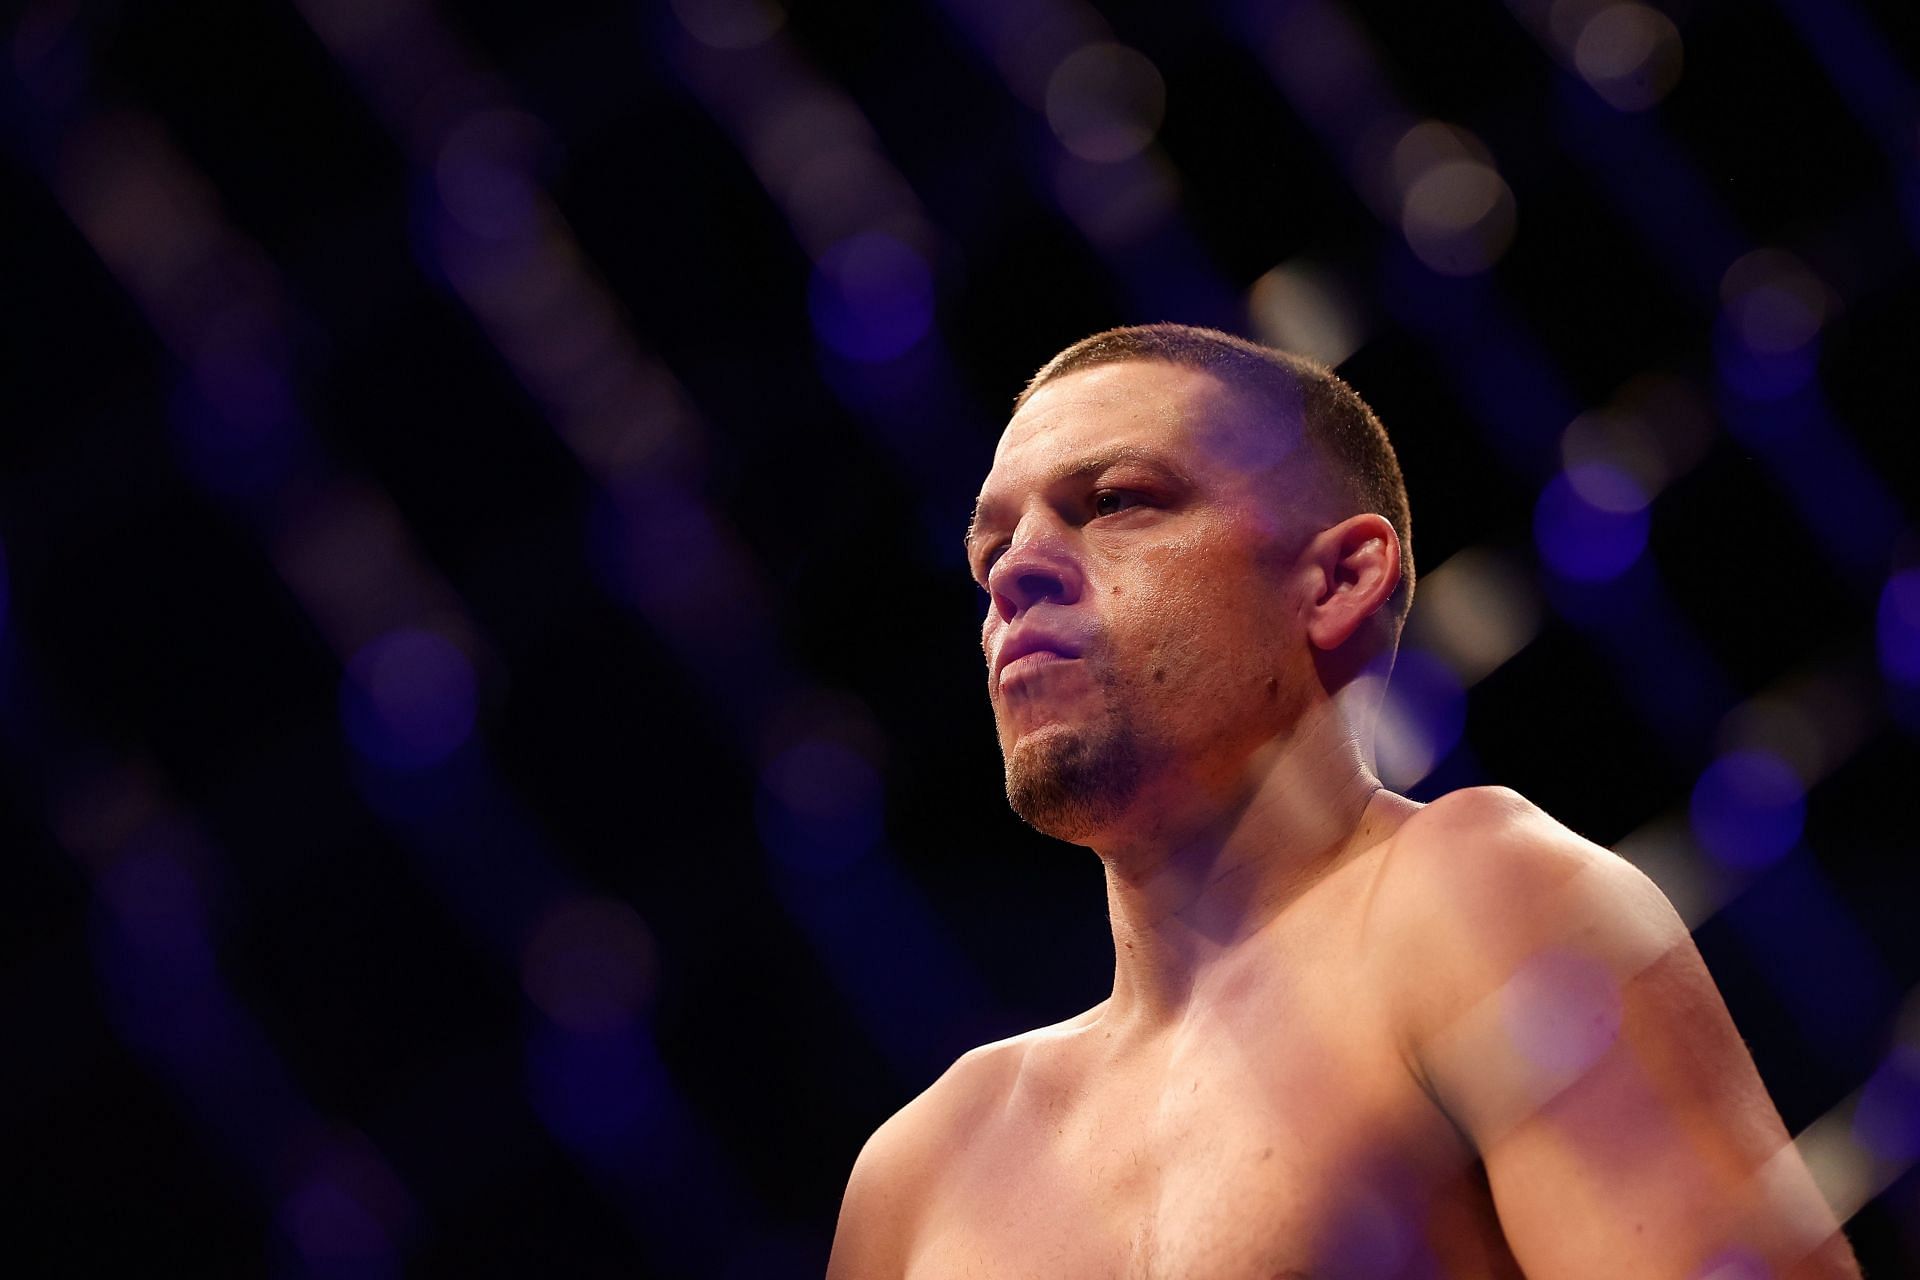 Nate Diaz has a record of 20-13